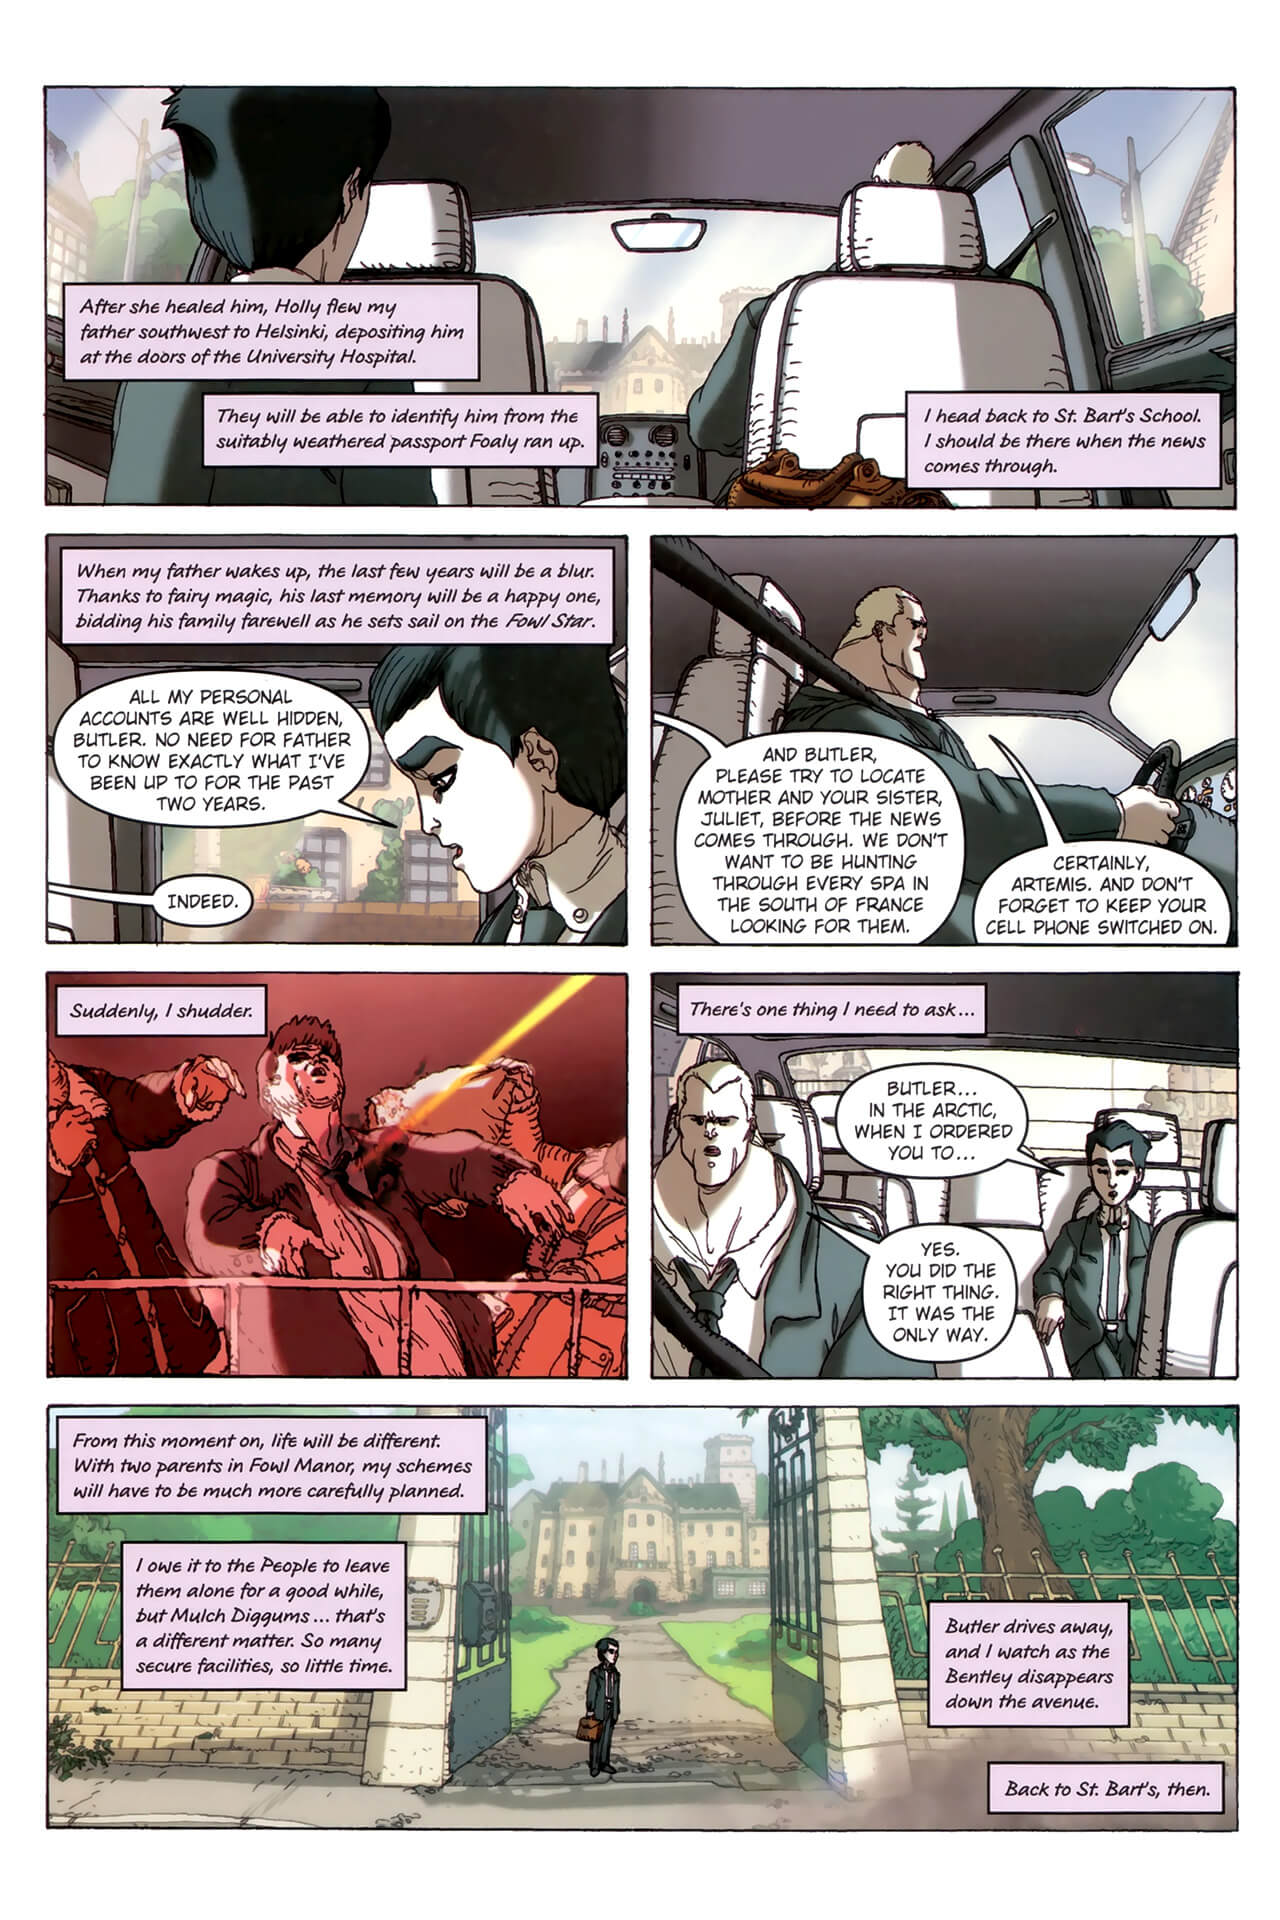 page 123 of artemis fowl the arctic incident graphic novel